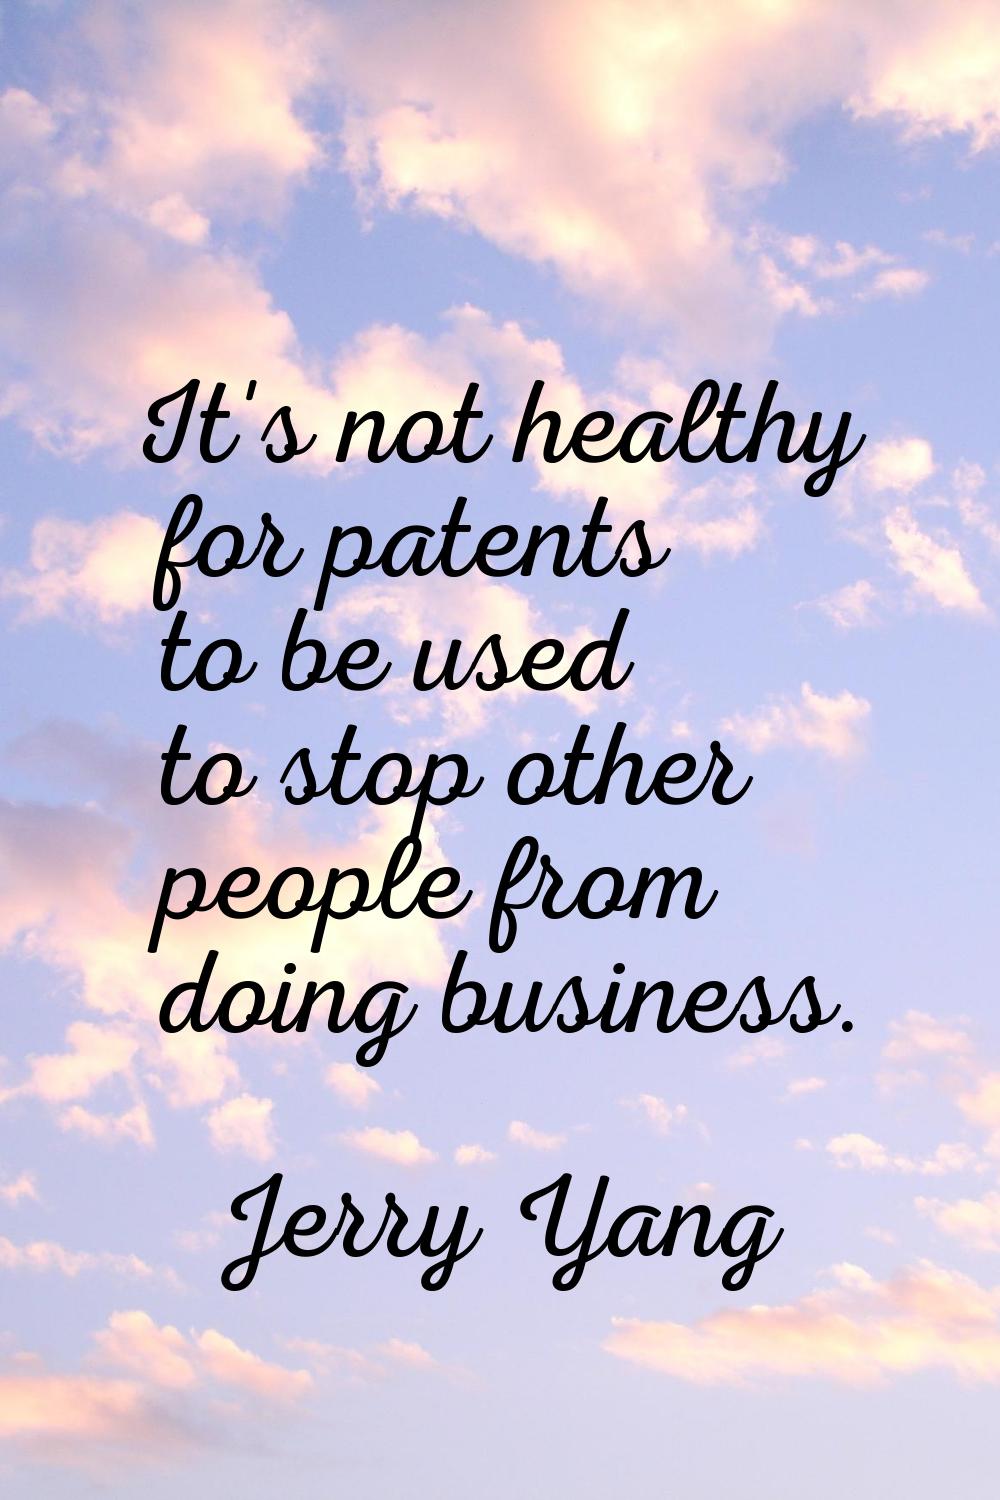 It's not healthy for patents to be used to stop other people from doing business.